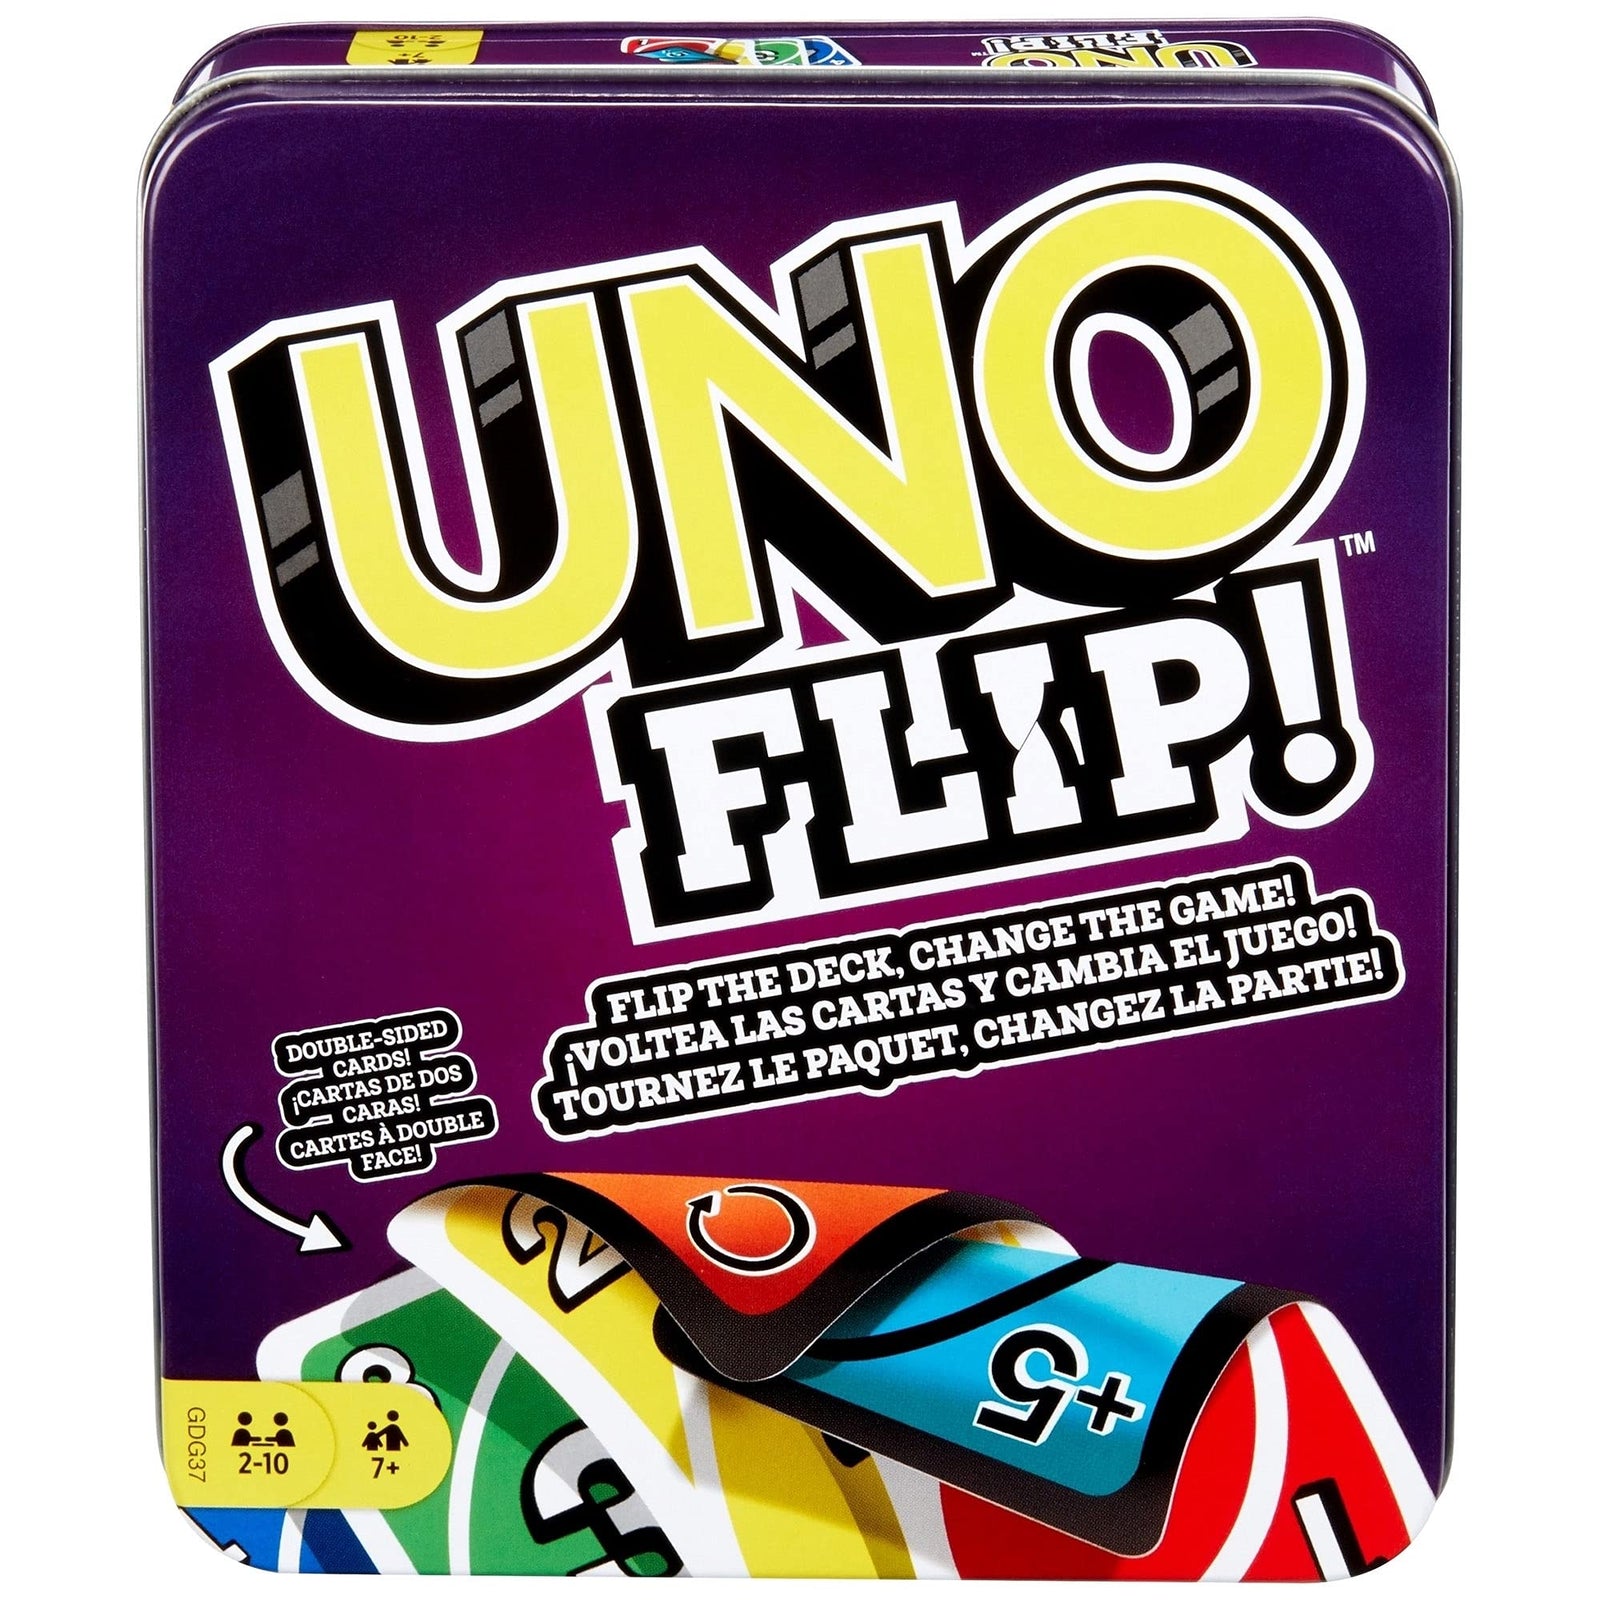 UNO FLIP! Family Card Game, with 112 Cards in a Sturdy Storage Tin, Makes a Great Gift for 7 Year Olds and Up UNO FLIP! Family Card Game, with 112 Cards in a Sturdy Storage Tin [Amazon Exclusive]